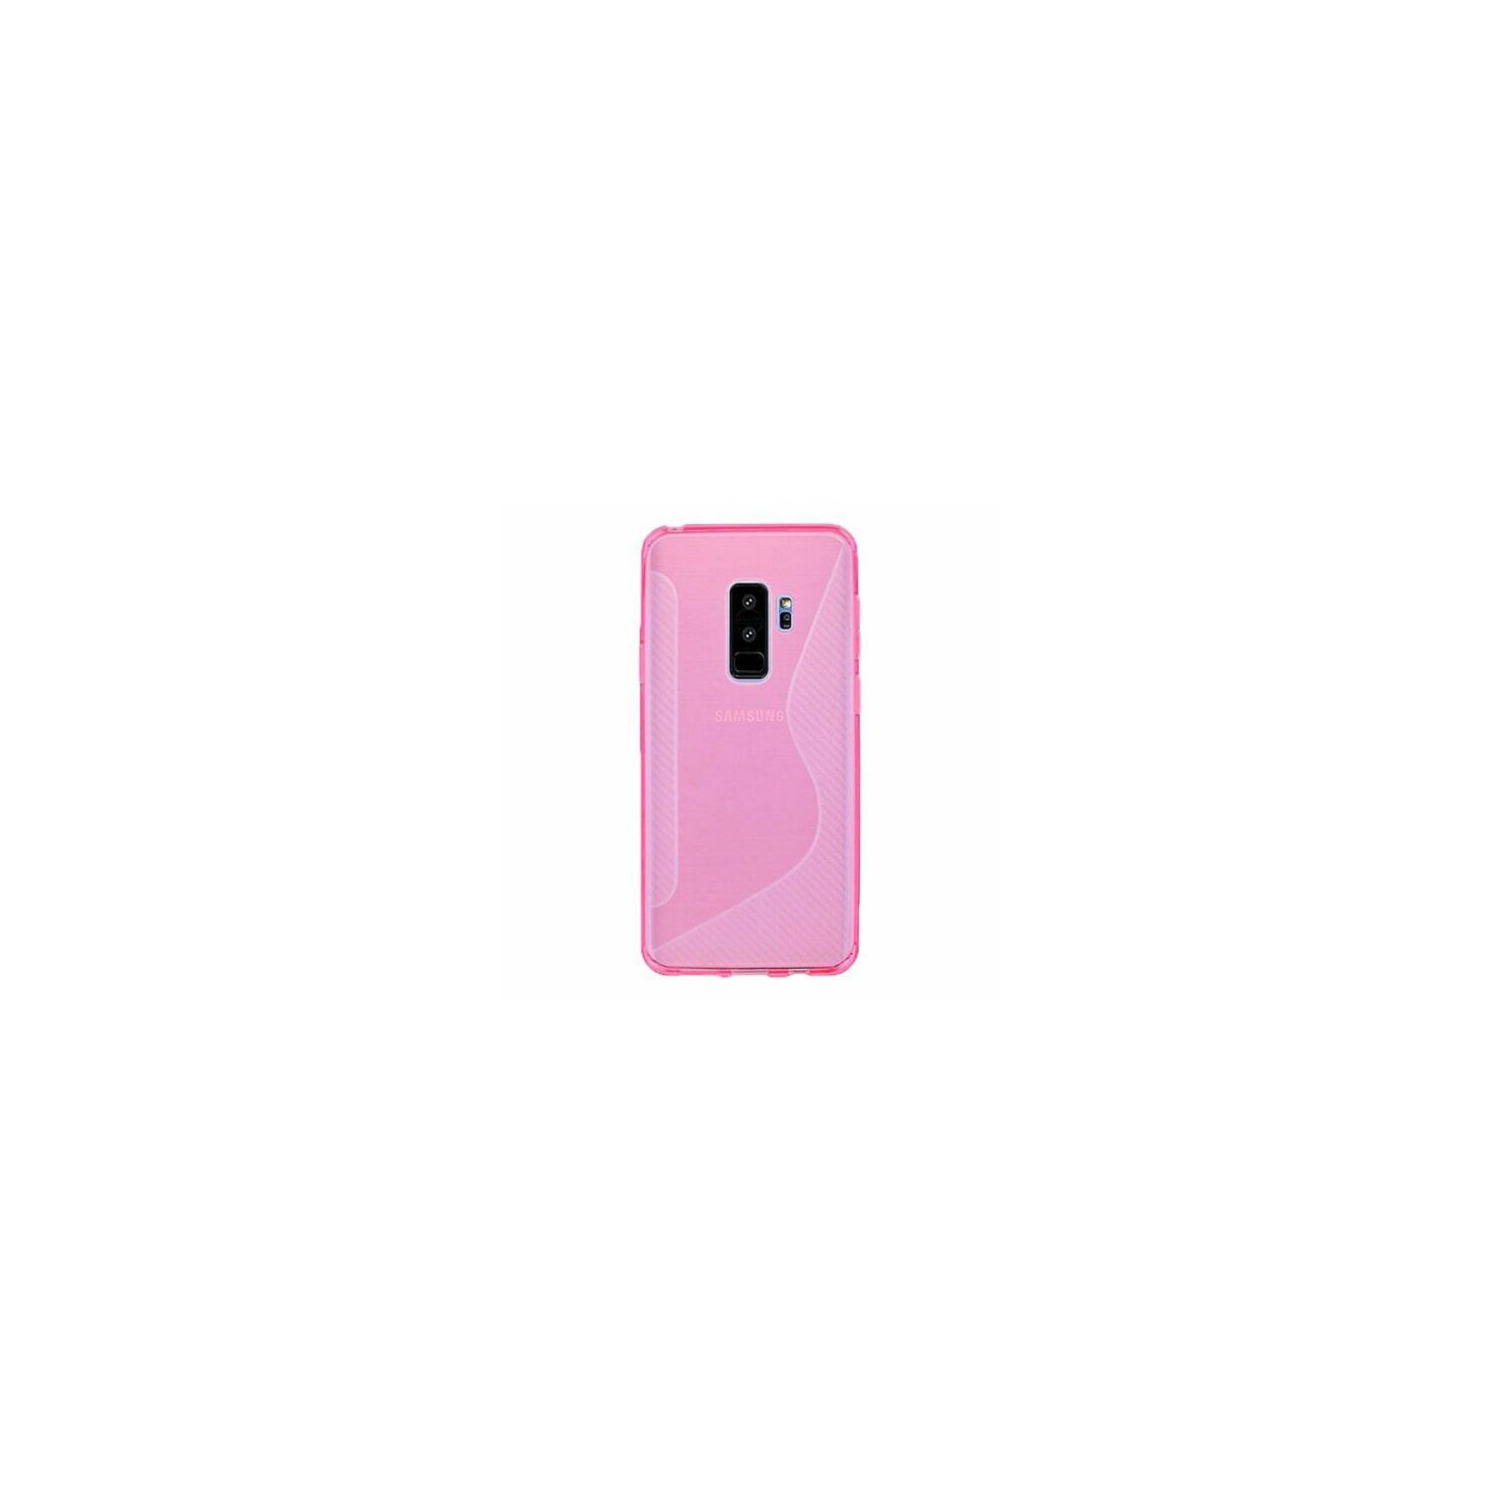 【CSmart】 Ultra Thin Soft TPU Silicone Jelly Bumper Back Cover Case for Samsung Galaxy S9 Plus, Hot Pink